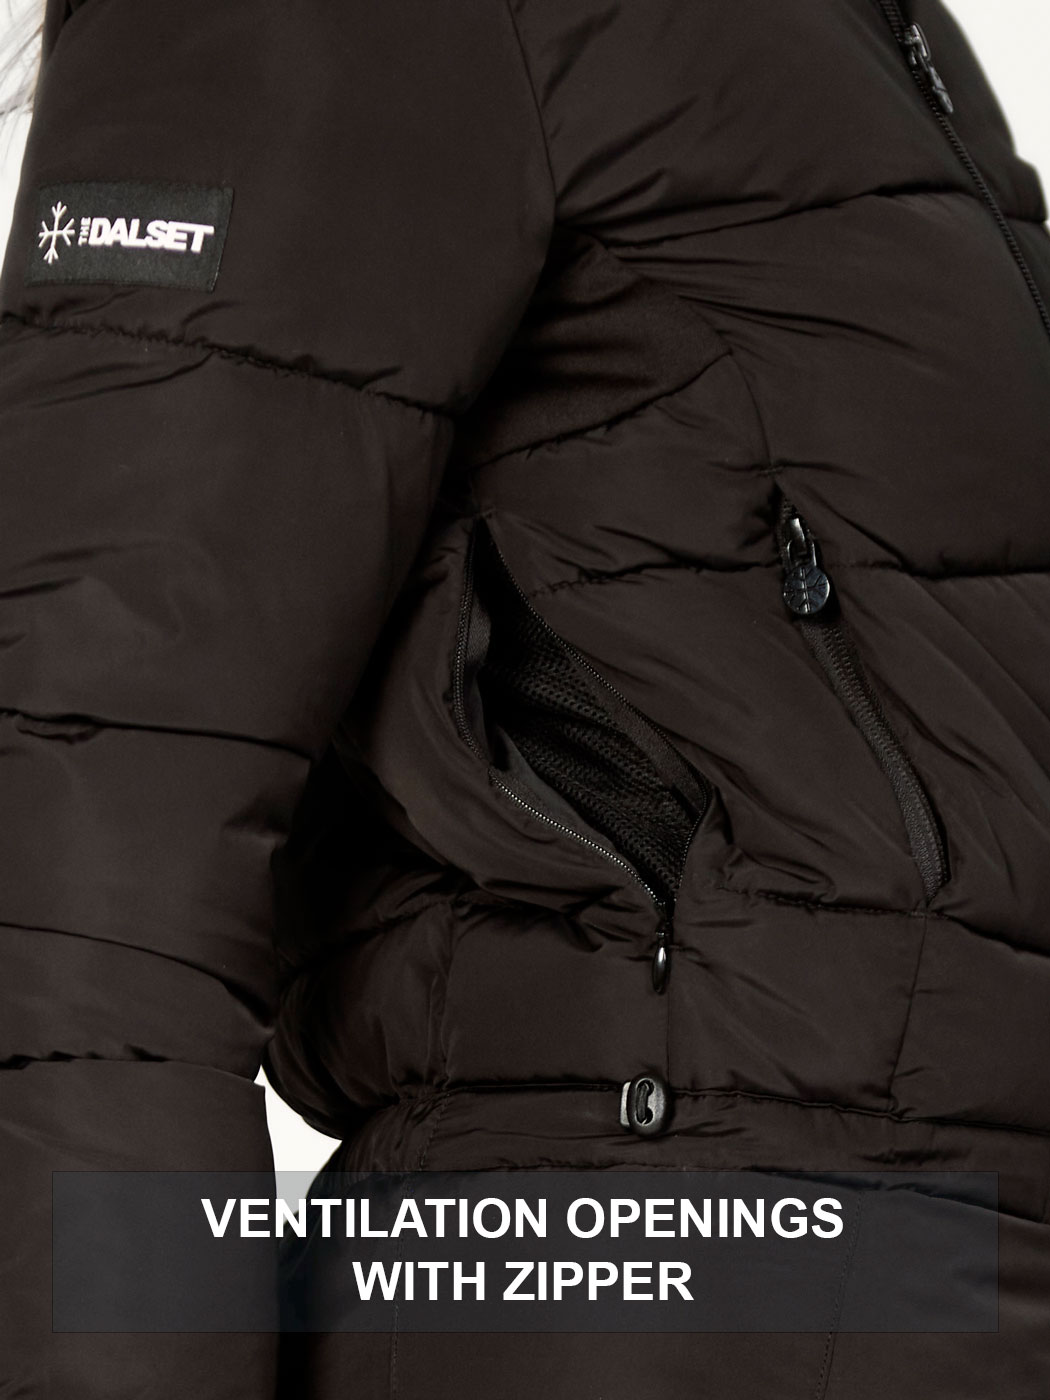 Onepiece-ventilation-openings-black-The-Dalset